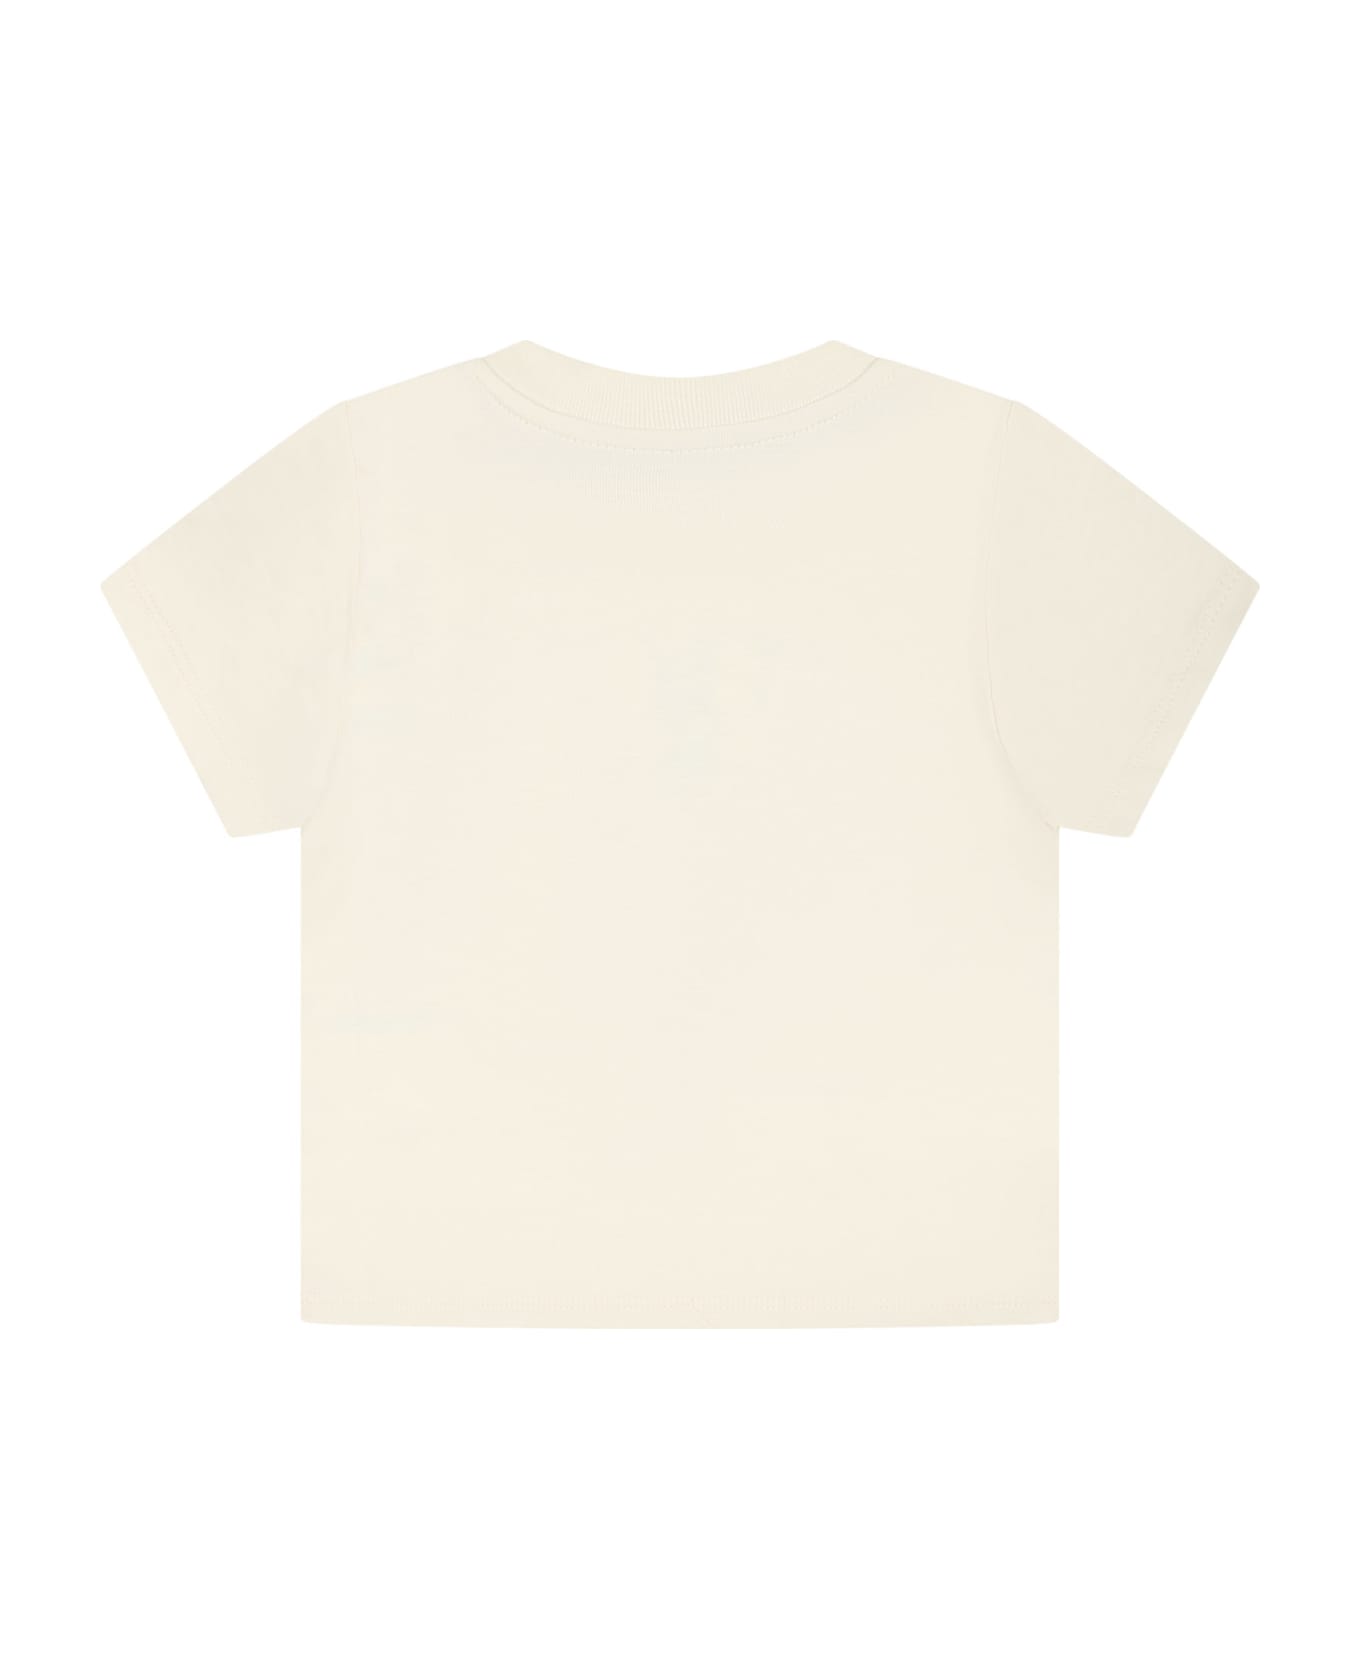 Gucci Ivory T-shirt For Baby Girl With Peter Rabbit - IVORY Tシャツ＆ポロシャツ